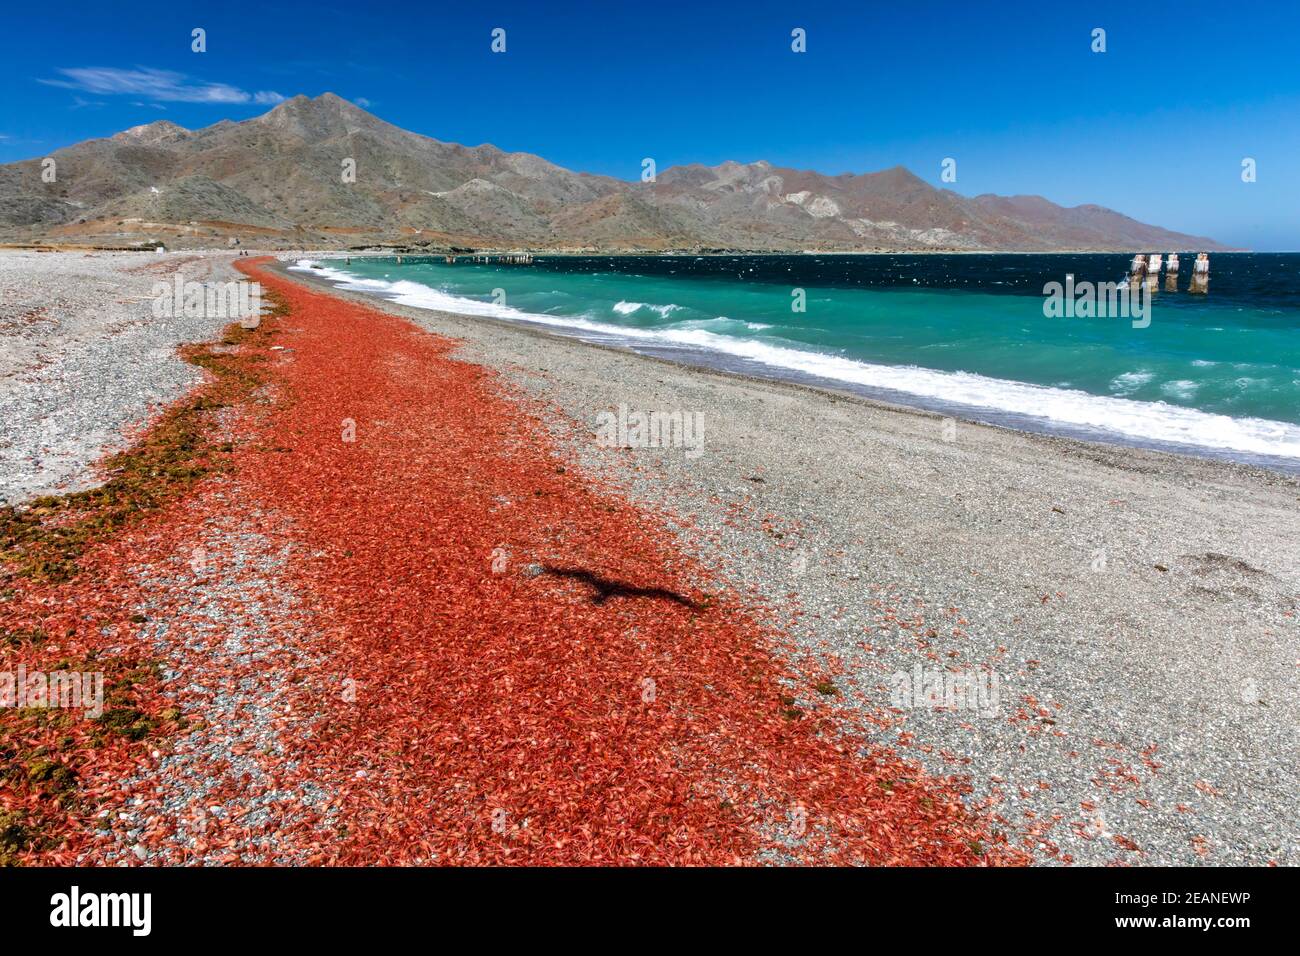 Swarms of pelagic crabs (Pleuroncodes planipes), washed up on the beach at Isla Magdalena, Baja California Sur, Mexico, North America Stock Photo